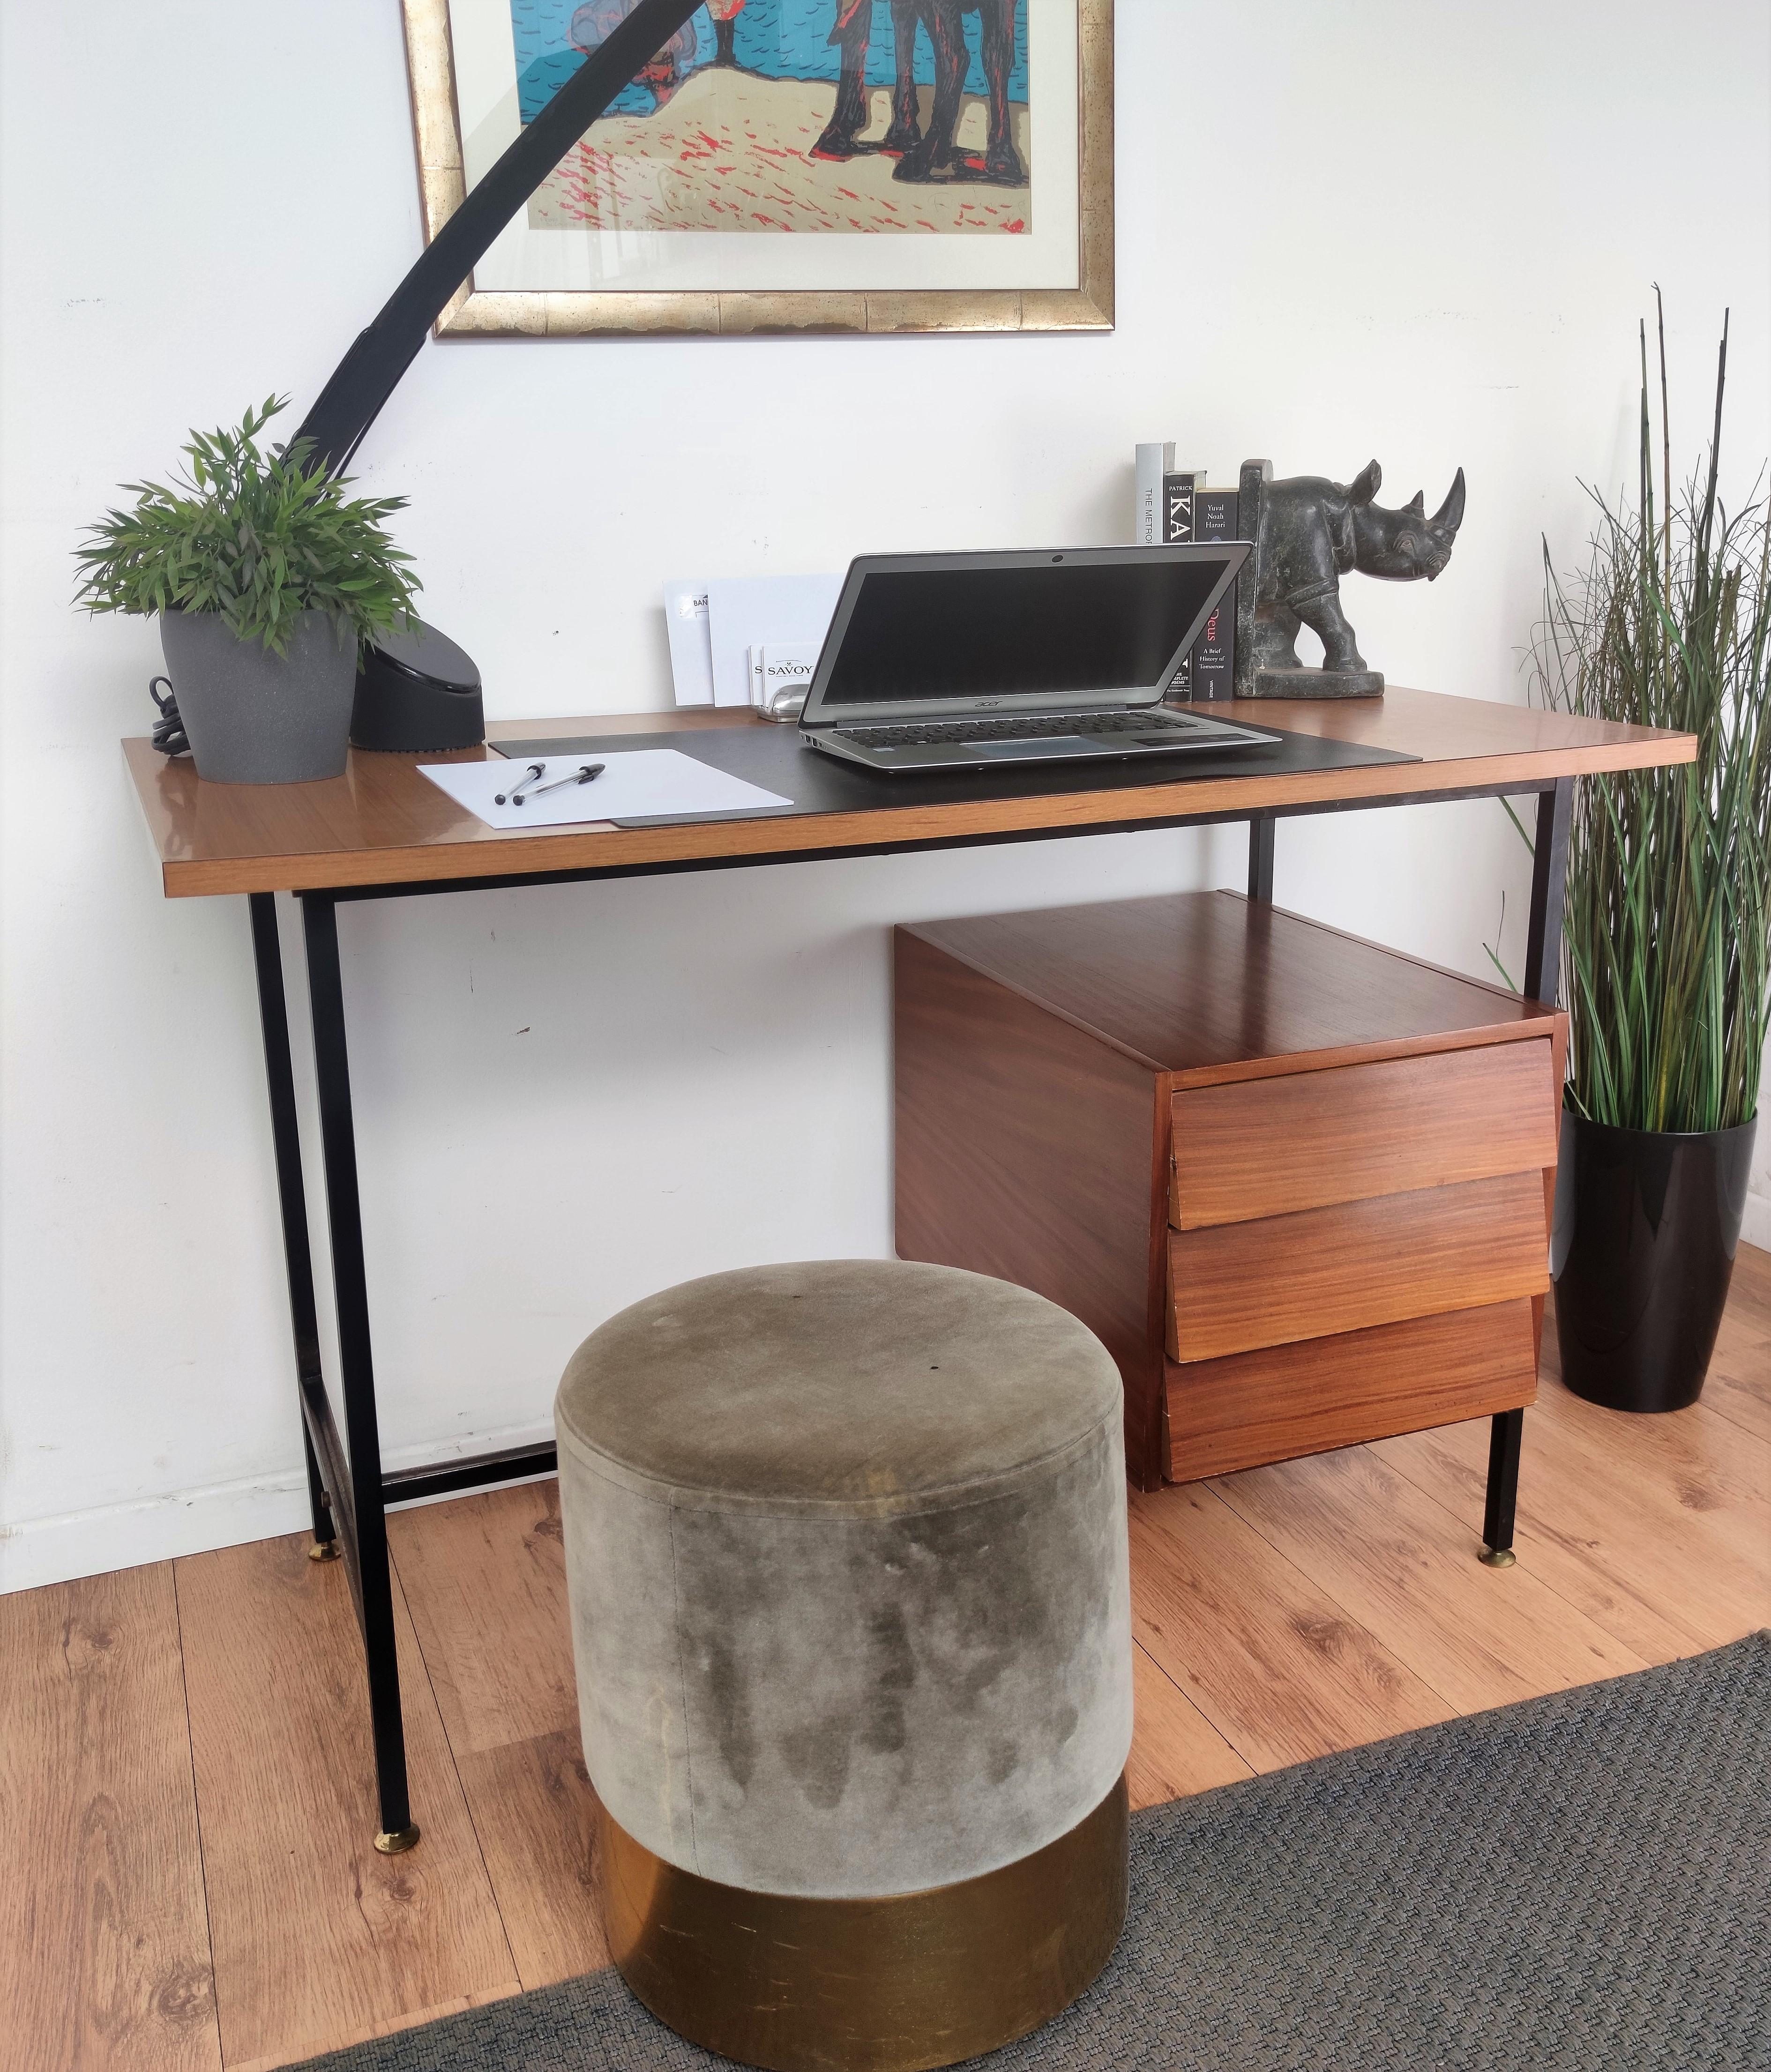 Typical Italian Late Mid-Century Modern desk or writing table in black metal cross bar base structure with gilt brass feet, 3 side wooden drawers and wooden top. Ideal in any room as a small stand alone corner desk as well as next the wall.